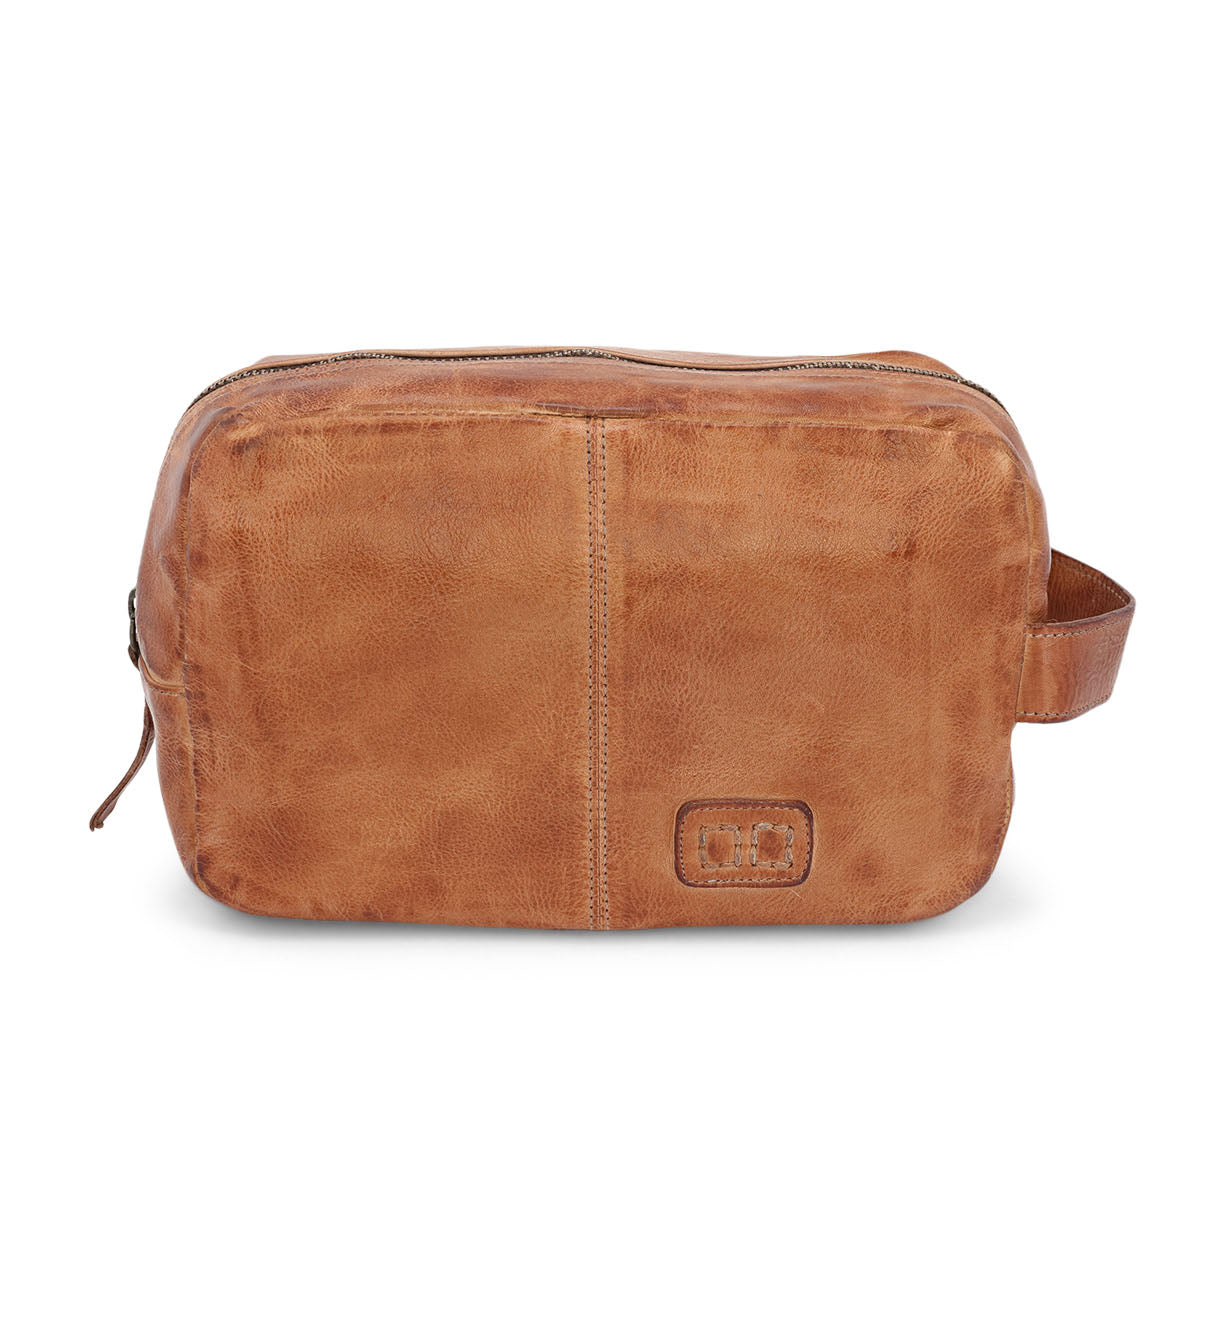 A Yatra by Bed Stu tan leather toiletry bag on a white background.